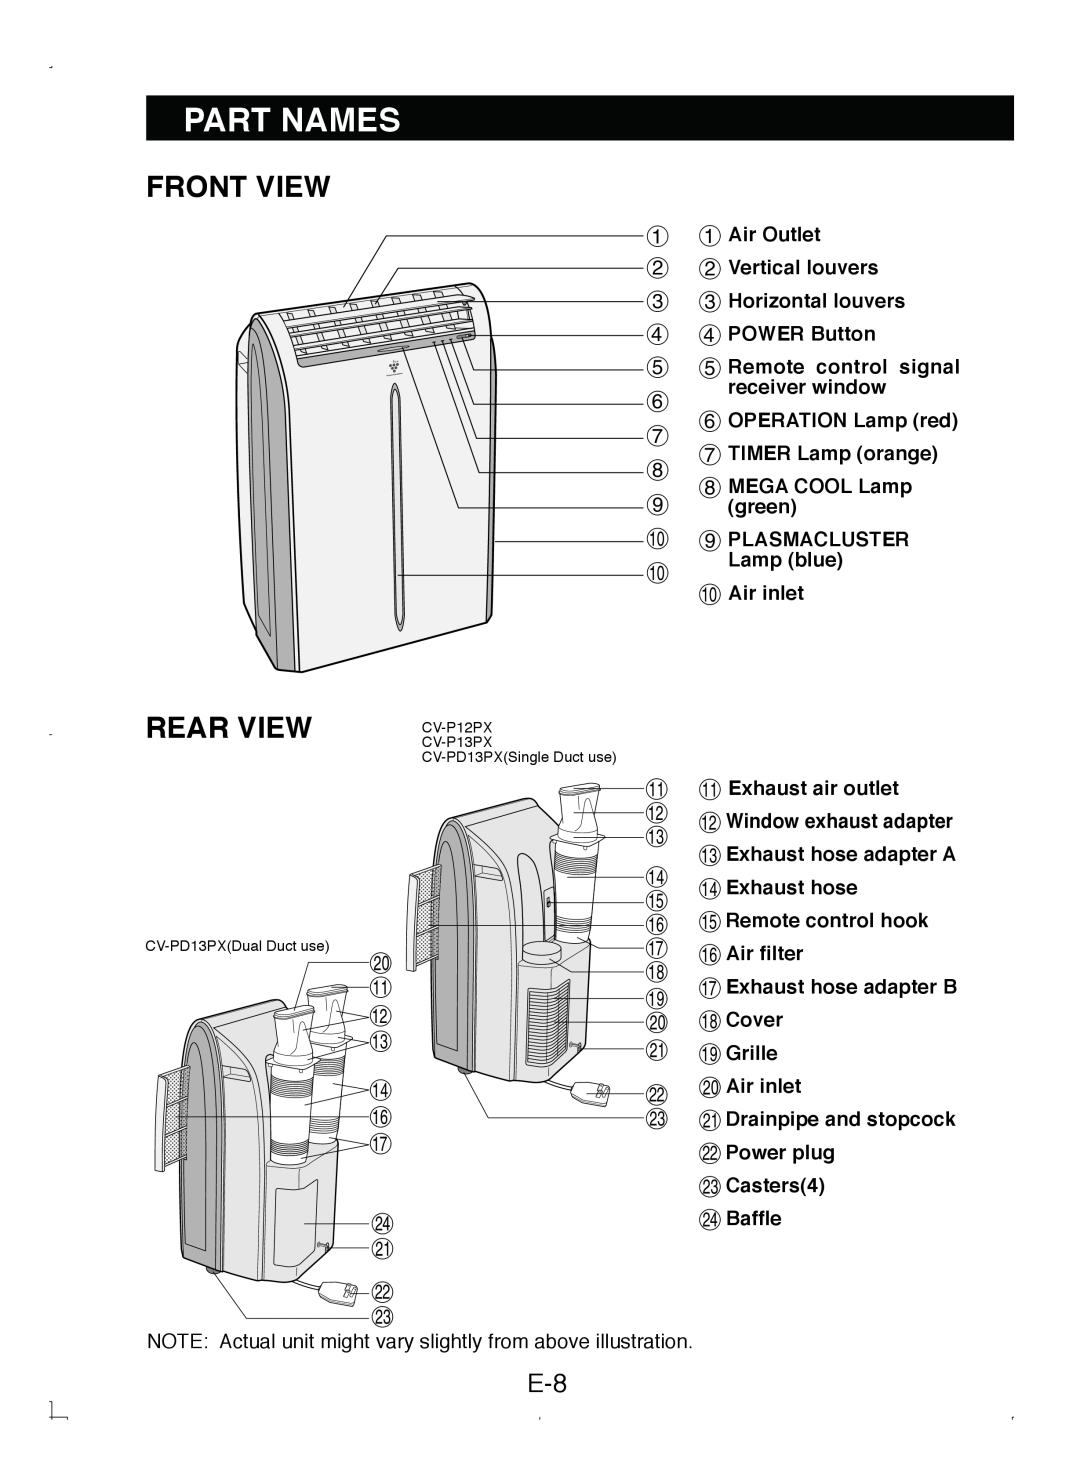 Sony CV-P12PX operation manual Part Names, Front View, Rear View 